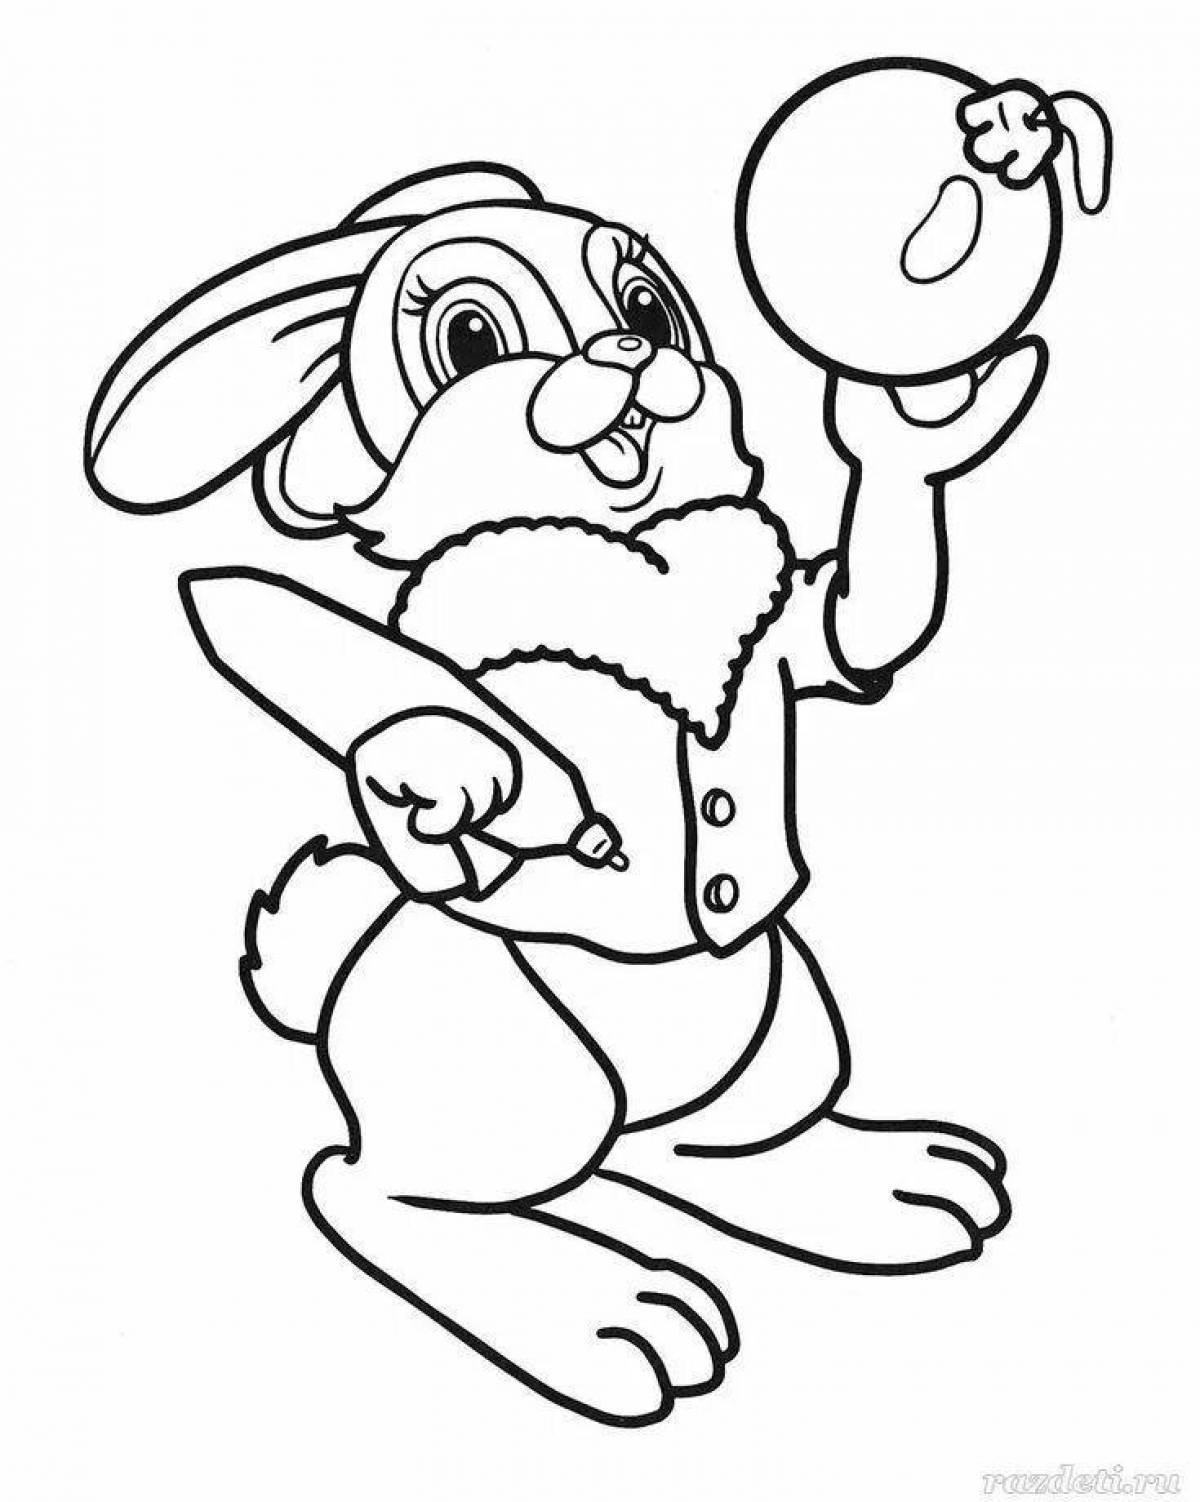 Coloring book cute hare for children 6-7 years old